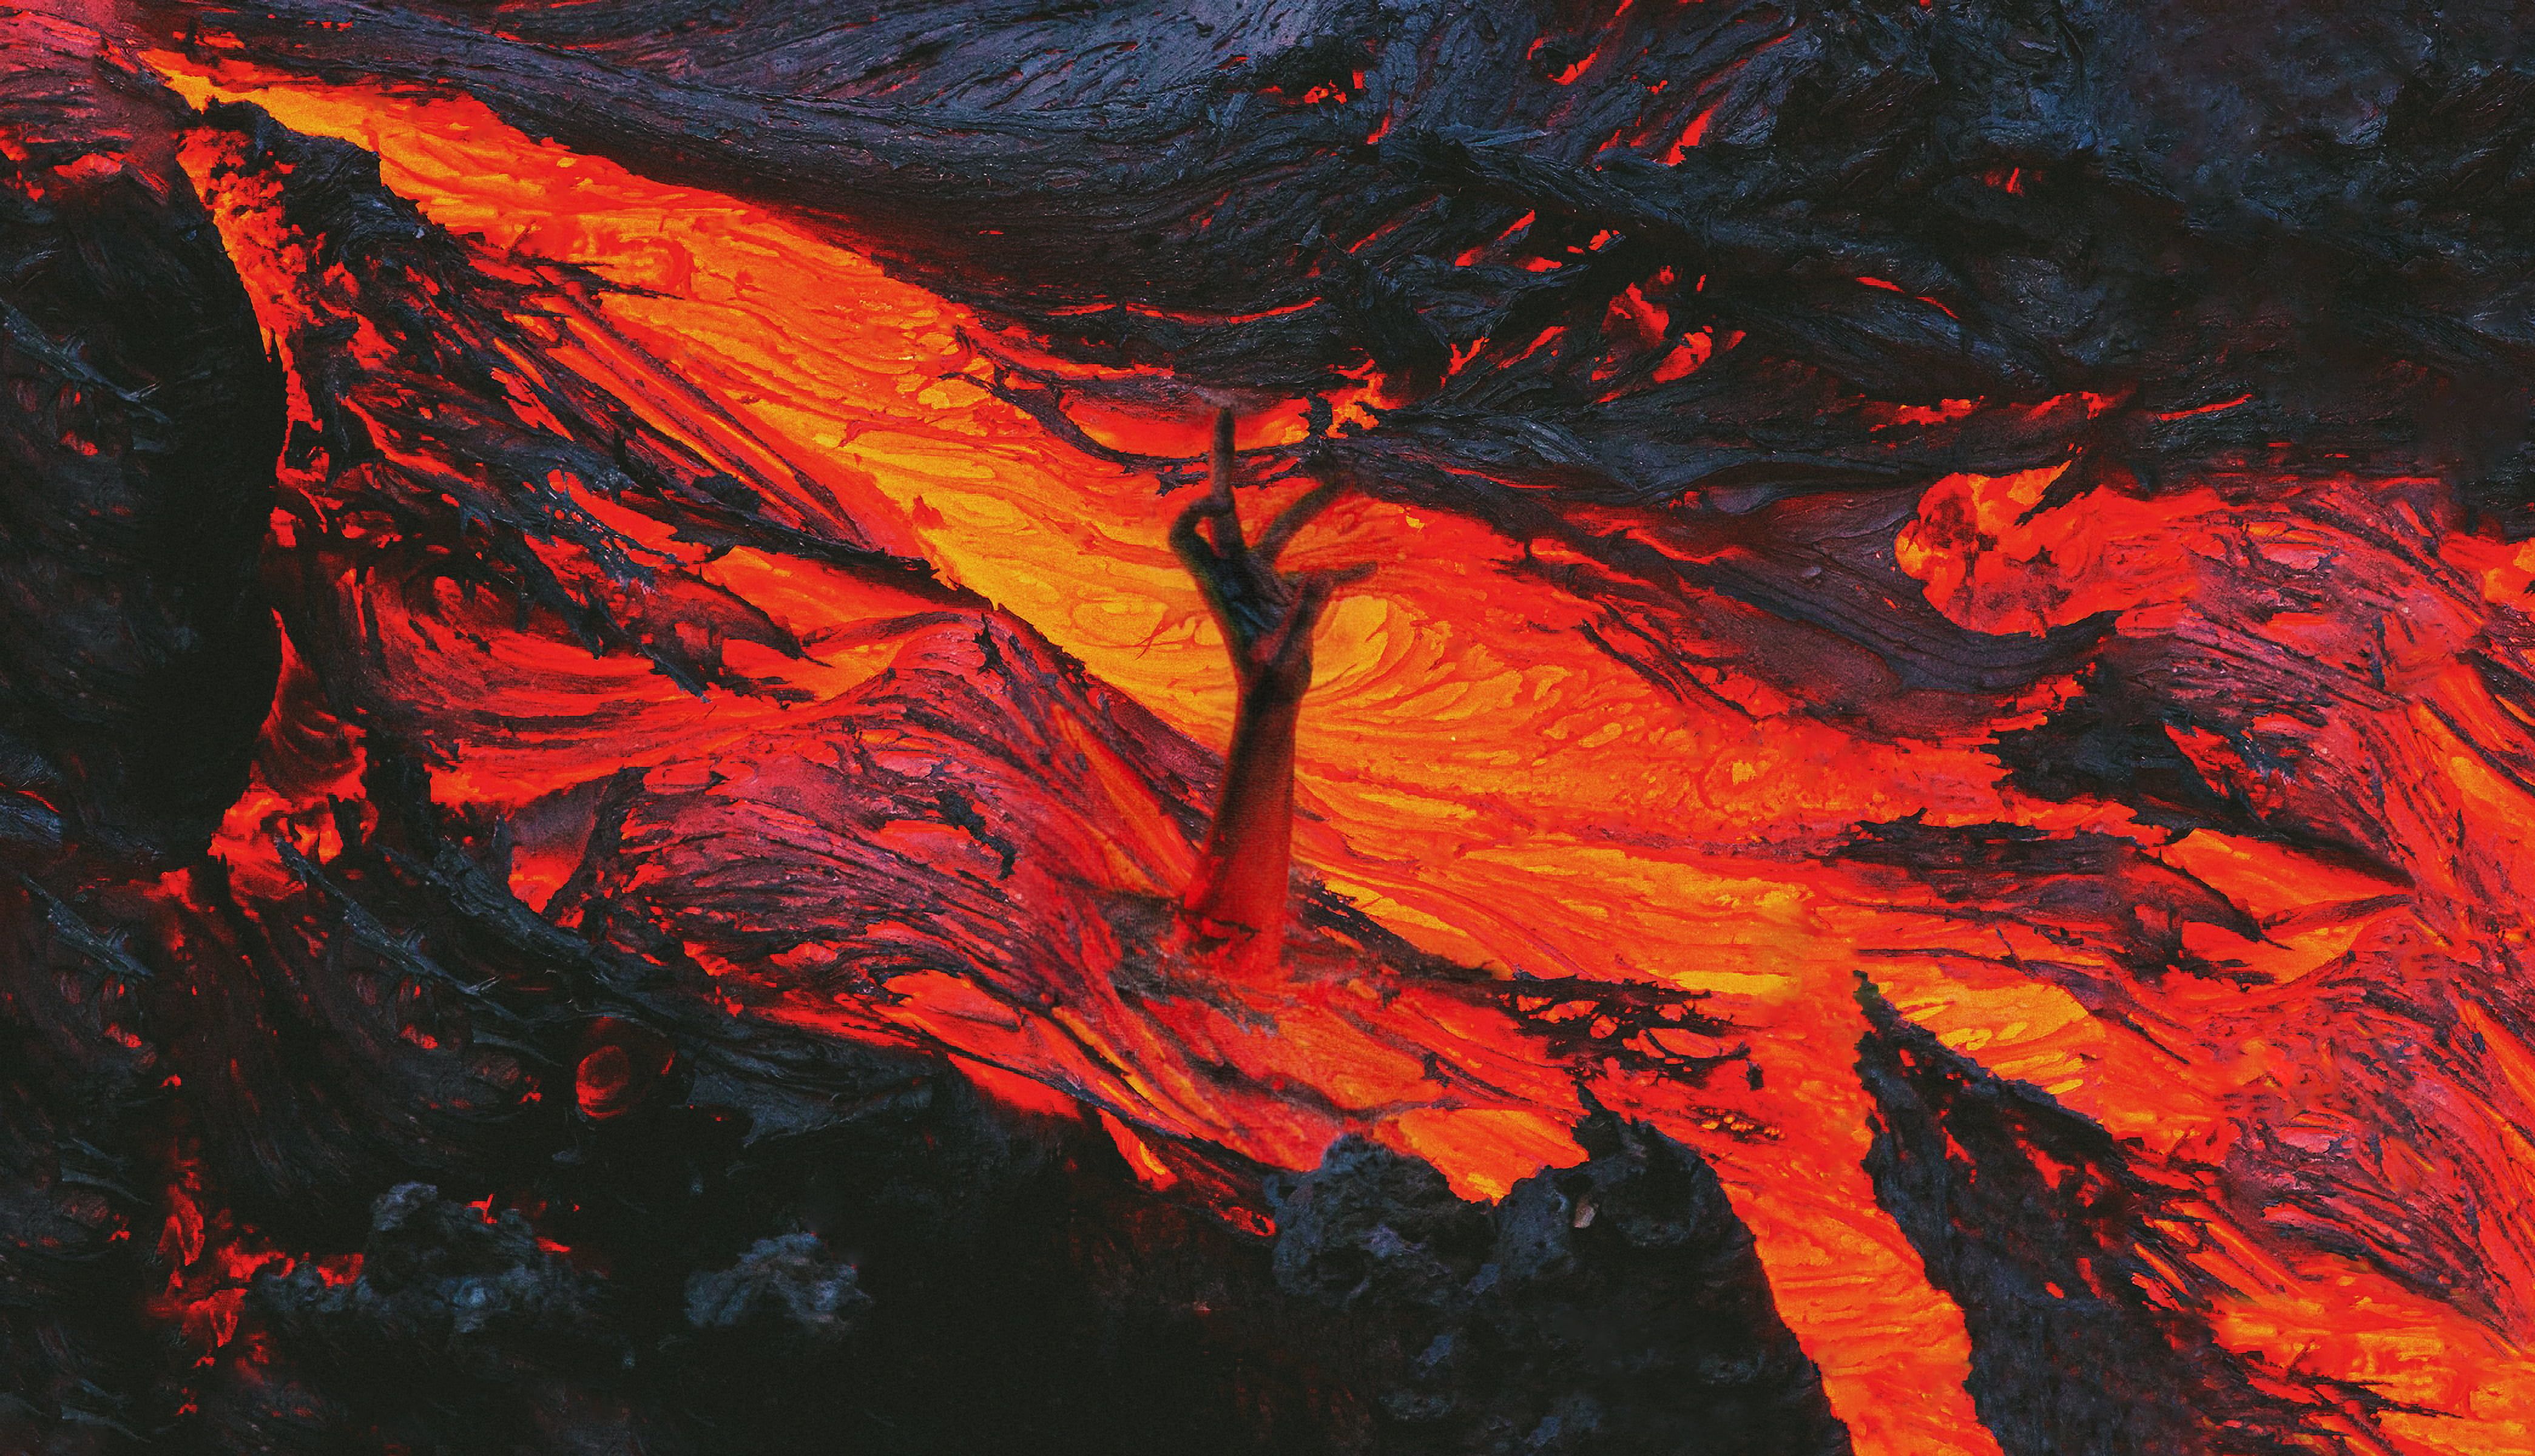 A red and black lava flowing down the mountain - Crimson